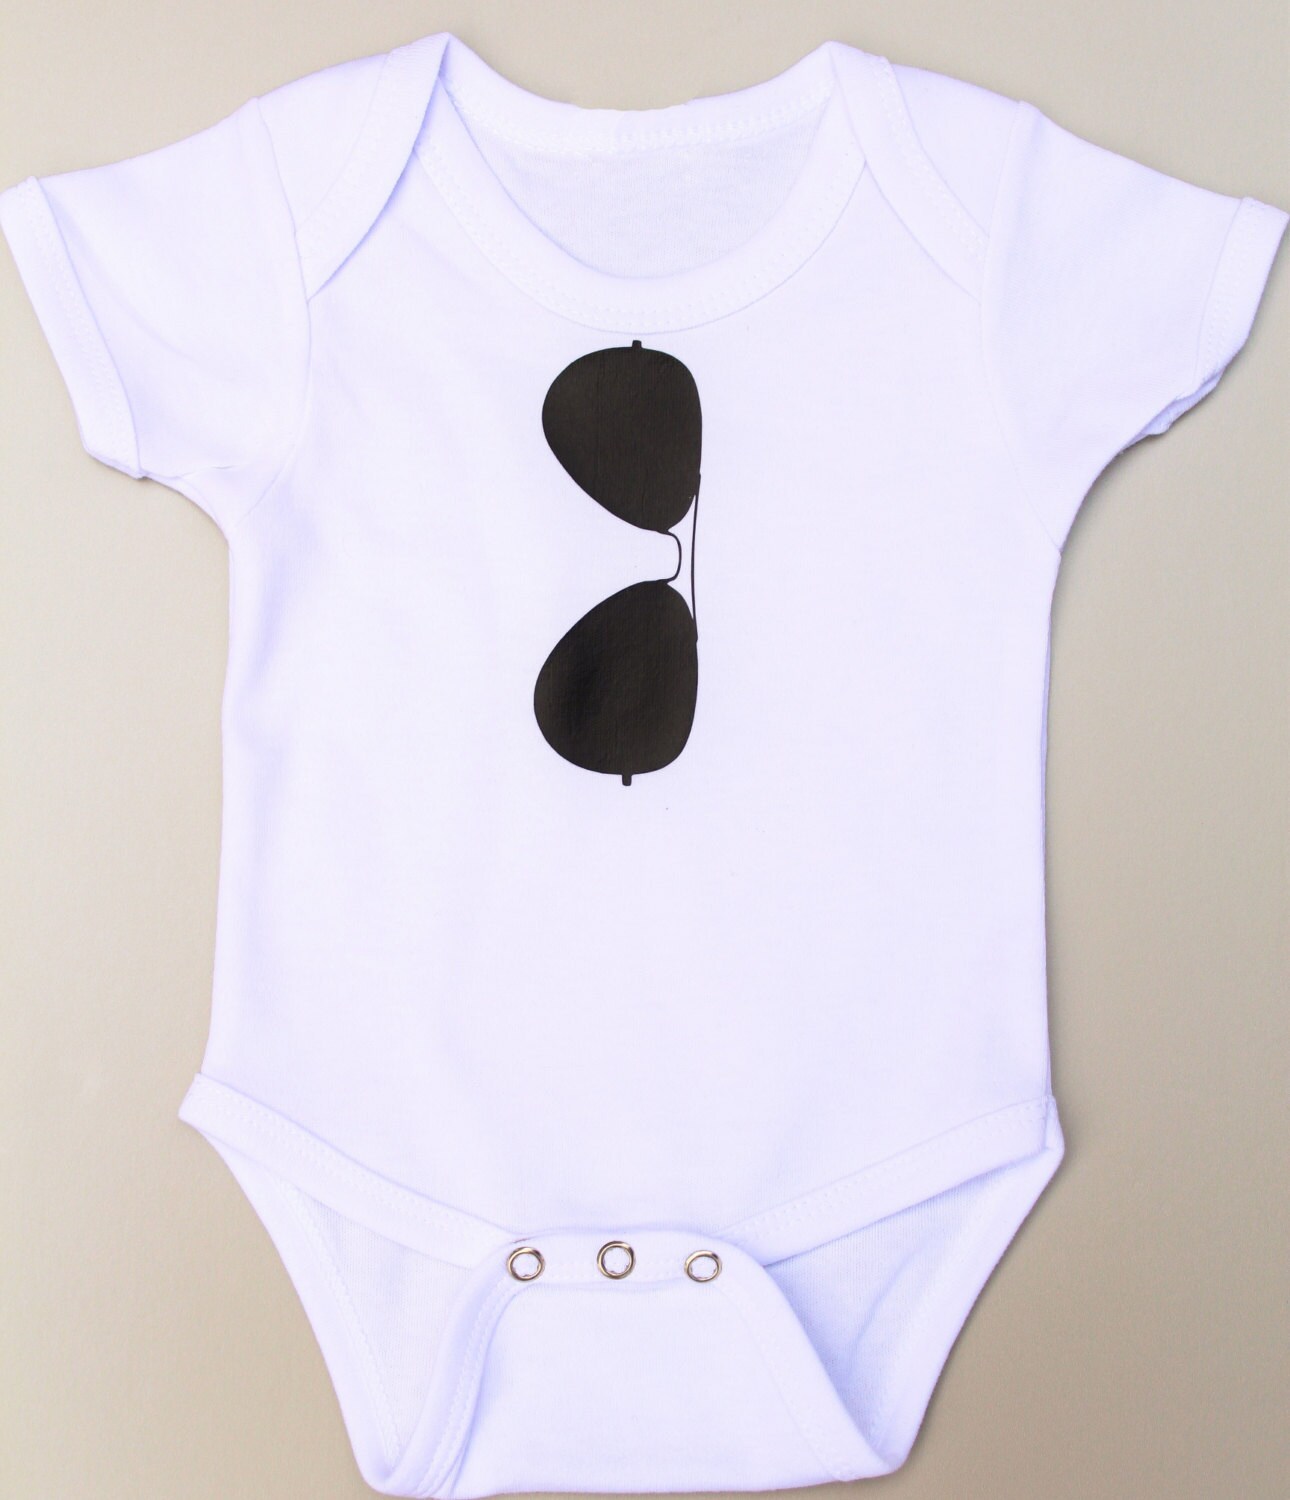 Baby Onesie Baby Shower Gift Bodysuit Baby by TinaBugsBoutique